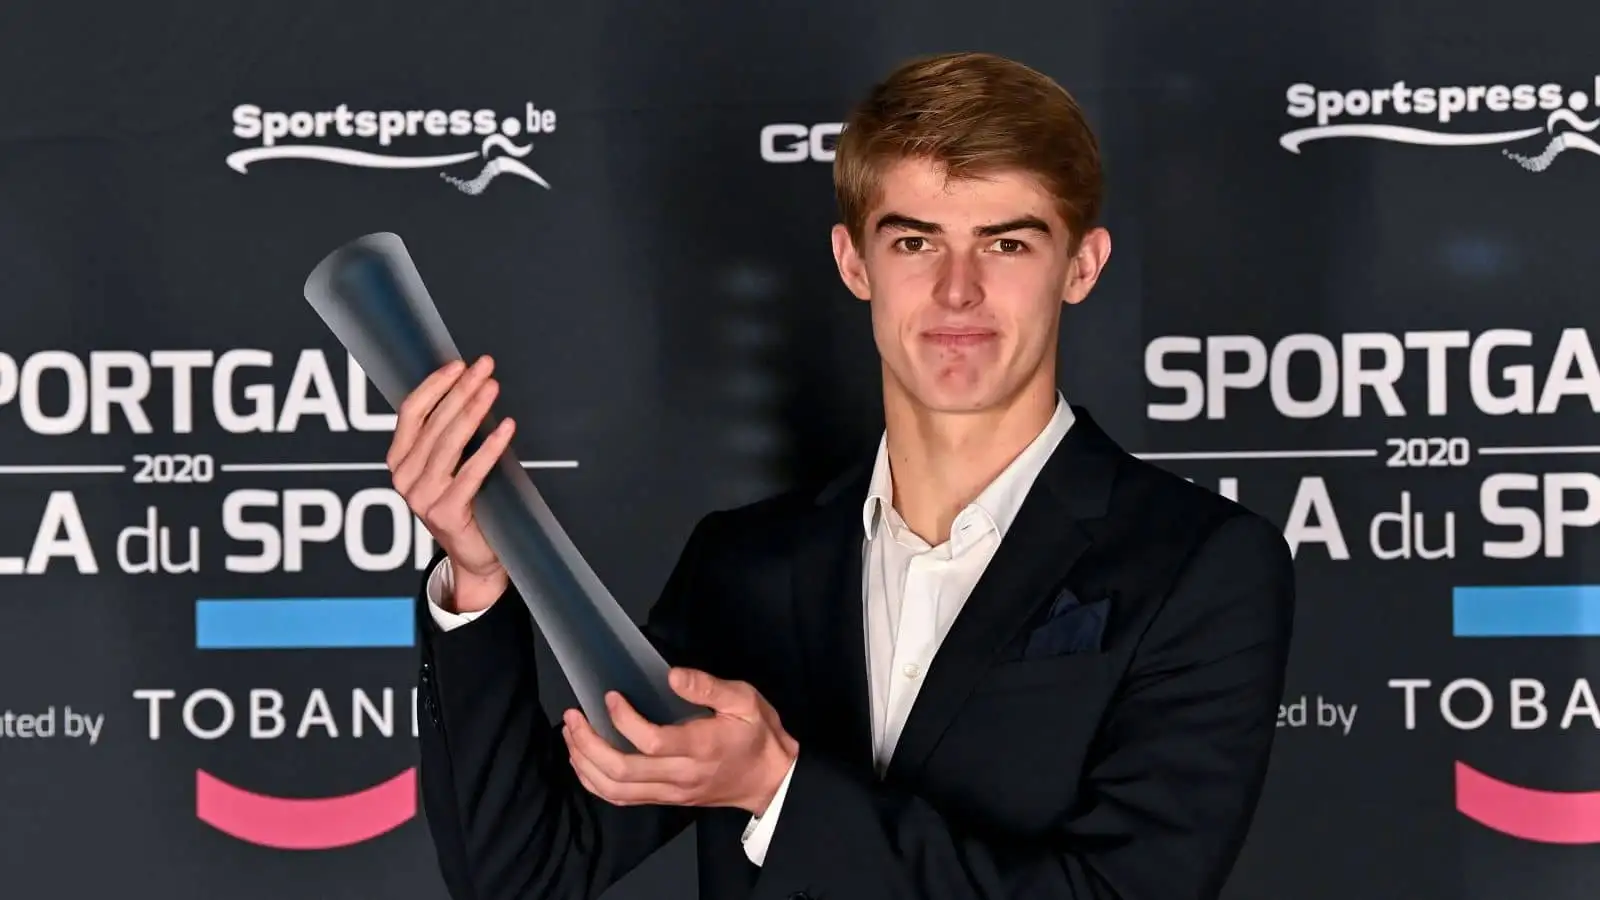 Charles De Ketelaere poses with the award for Most Promising Sportsman at the gala evening for the sport women and men of the year 2020 awards